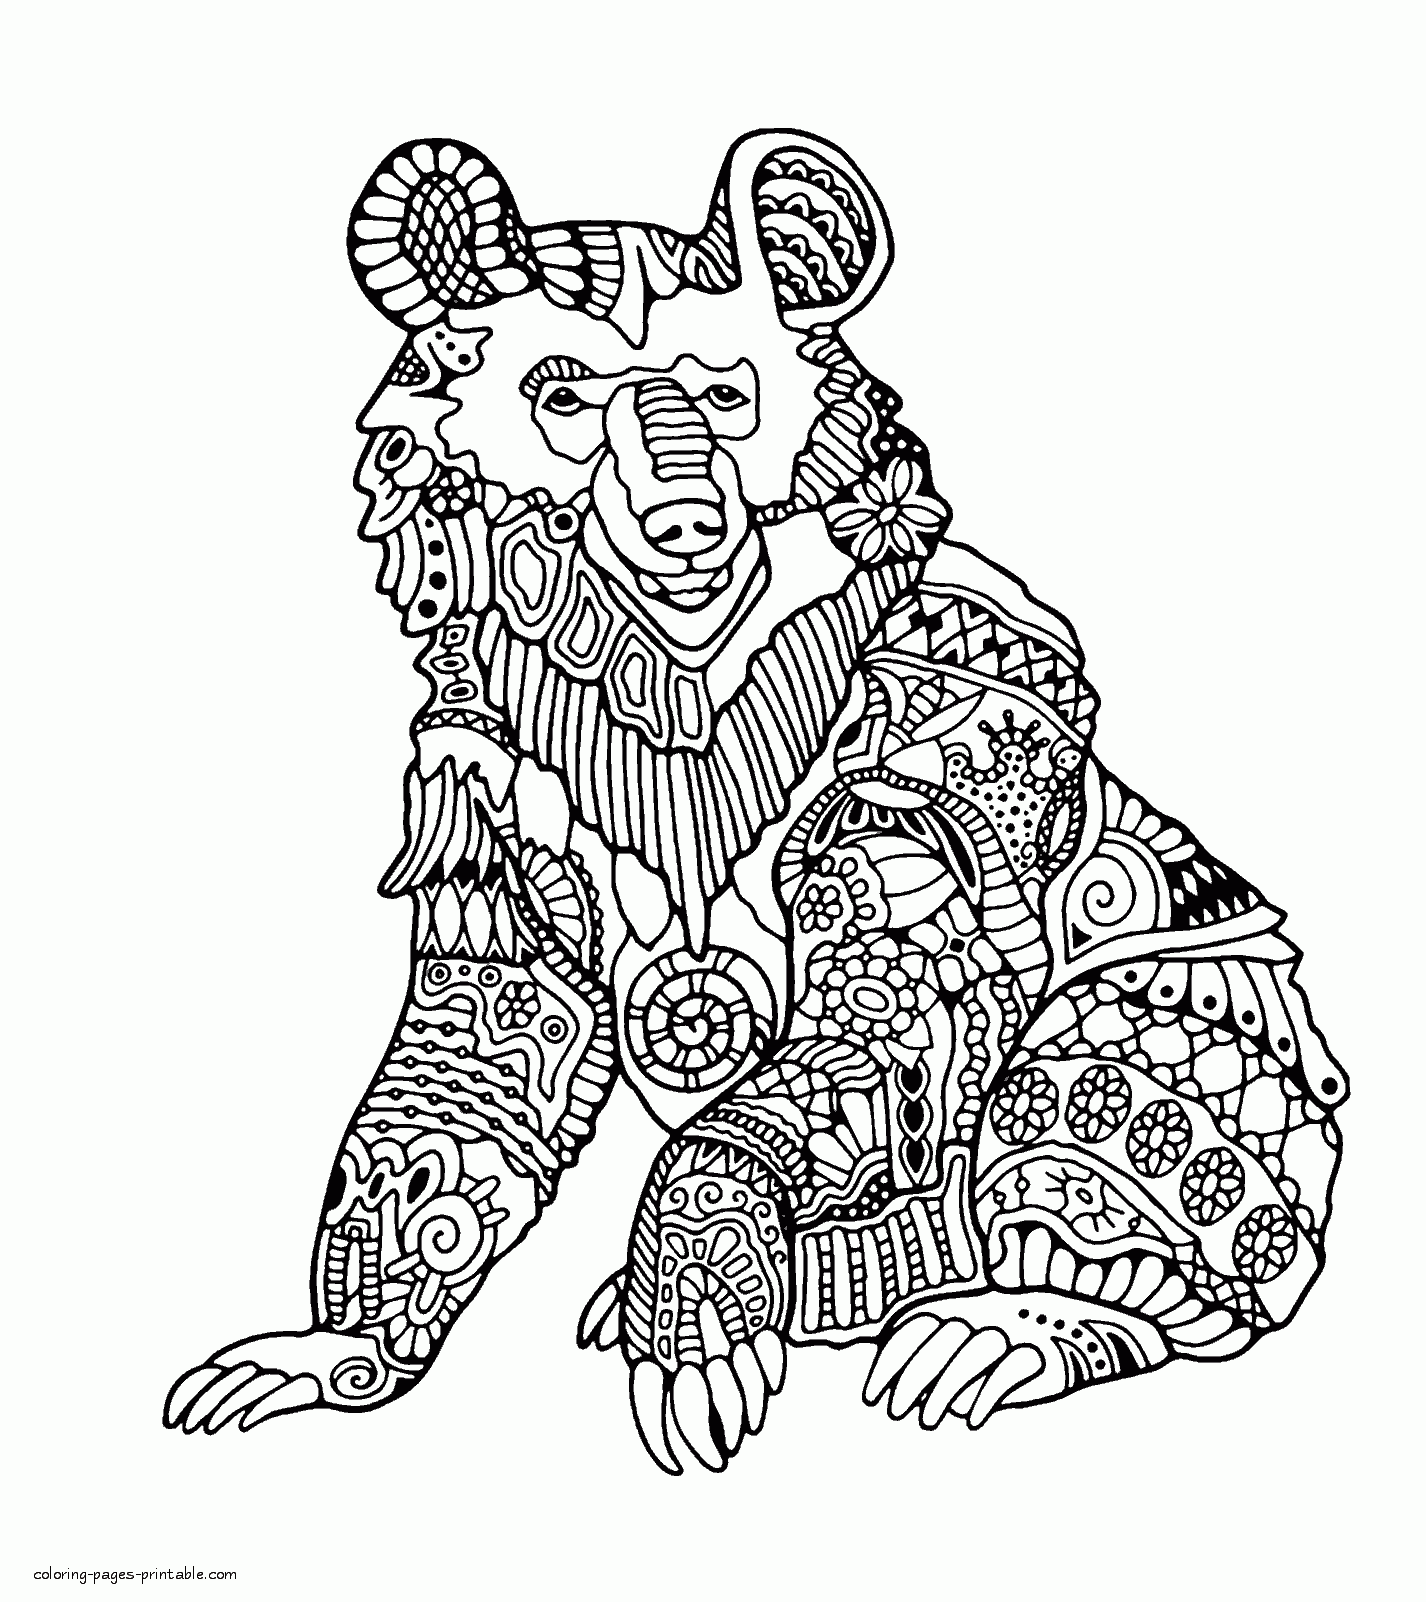 Hard Animal Coloring Pages For Adults Printable - Printable Coloring